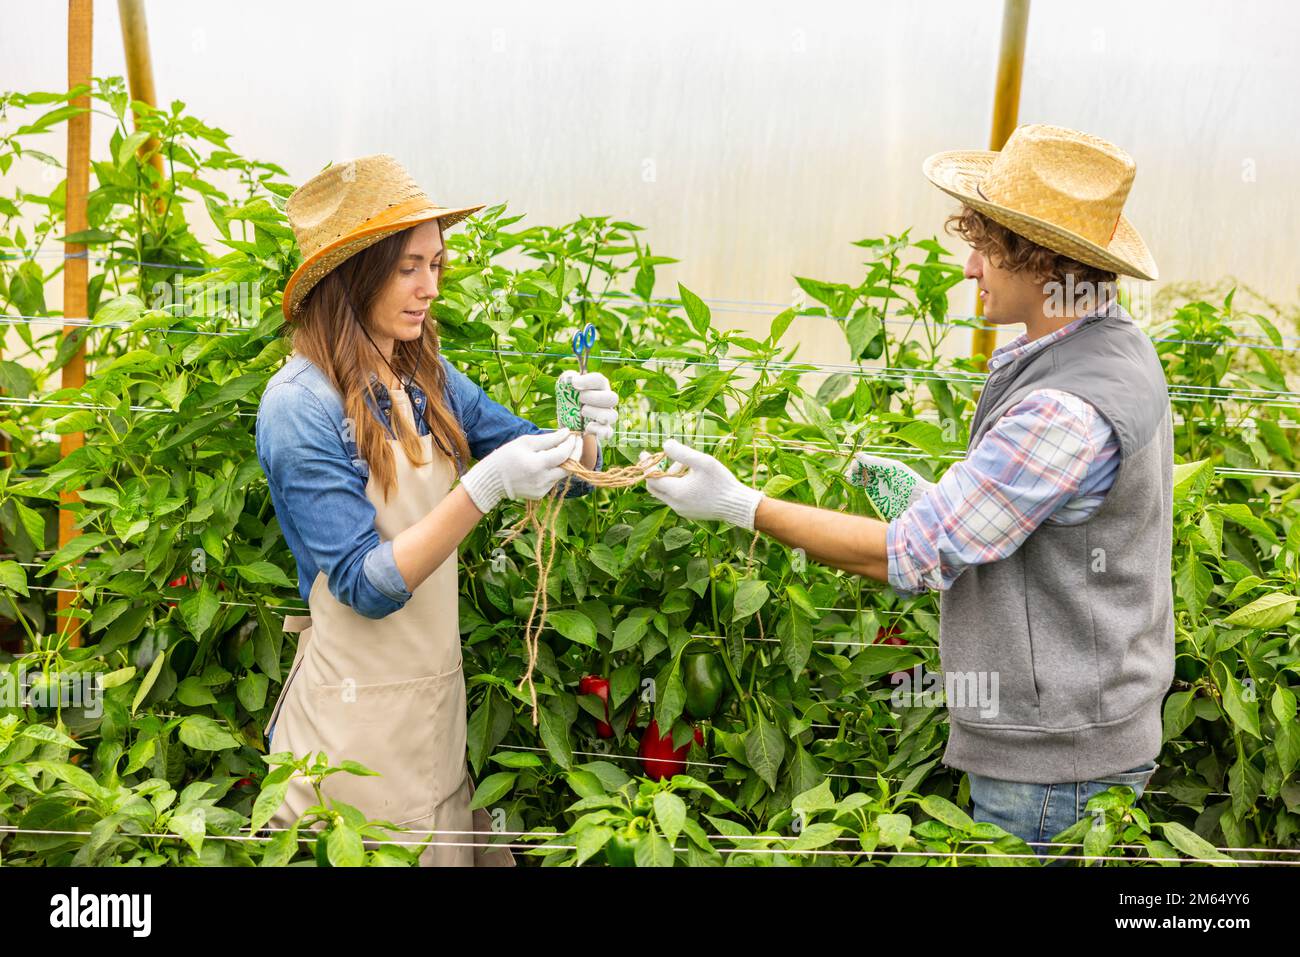 Two agronomists preparing to tie vegetable crops in a hothouse Stock Photo